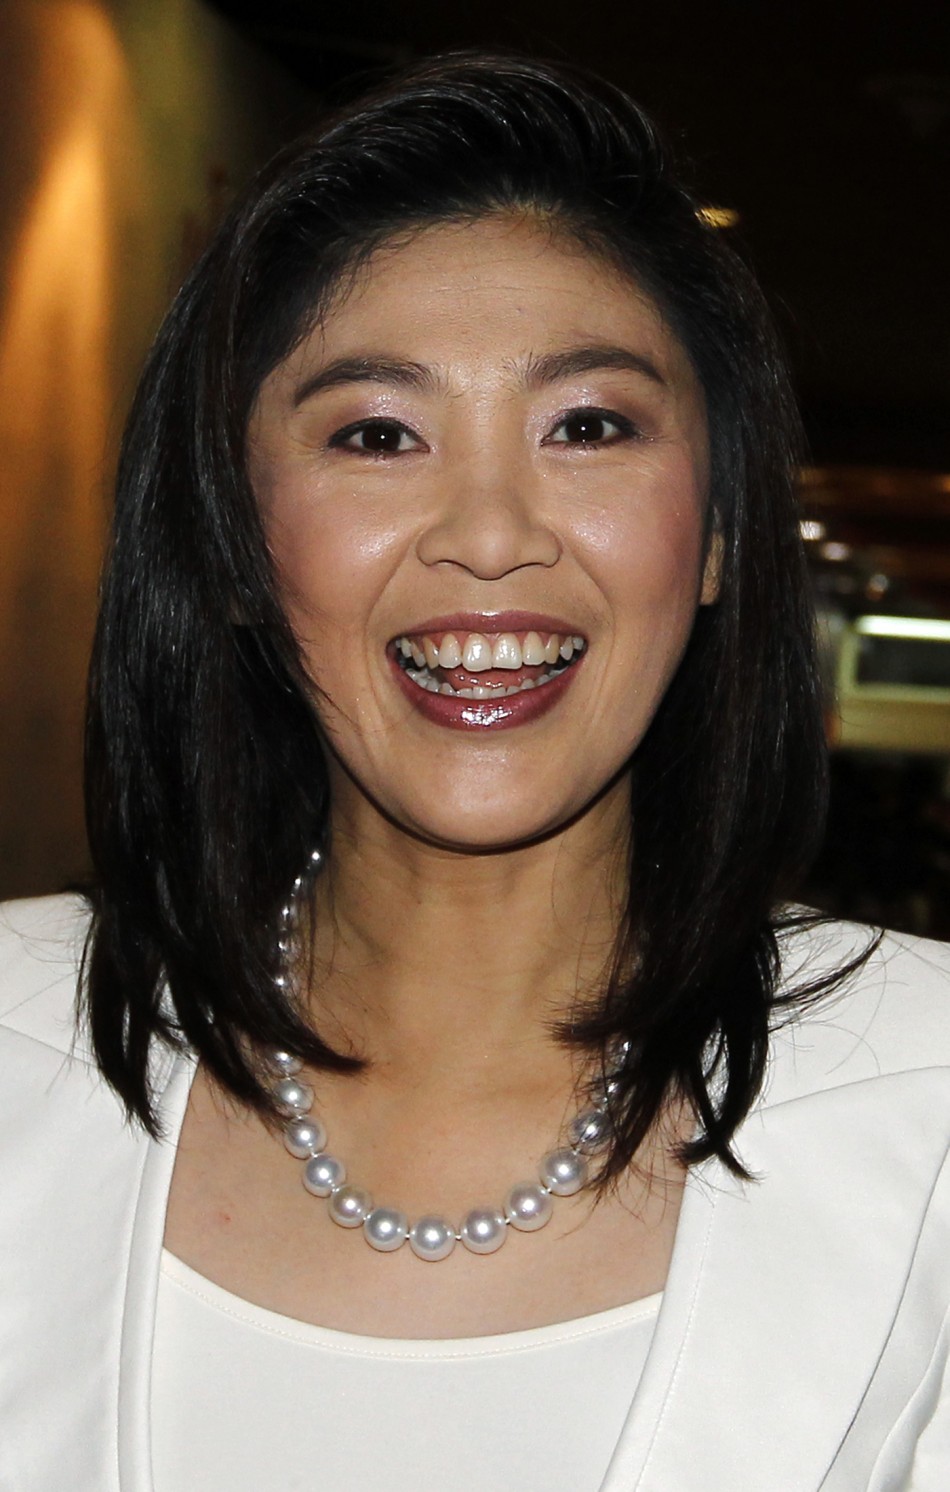 PM-elect Yingluck Shinawatra of the Puea Thai Party arrives at her partys headquarters in Bangkok